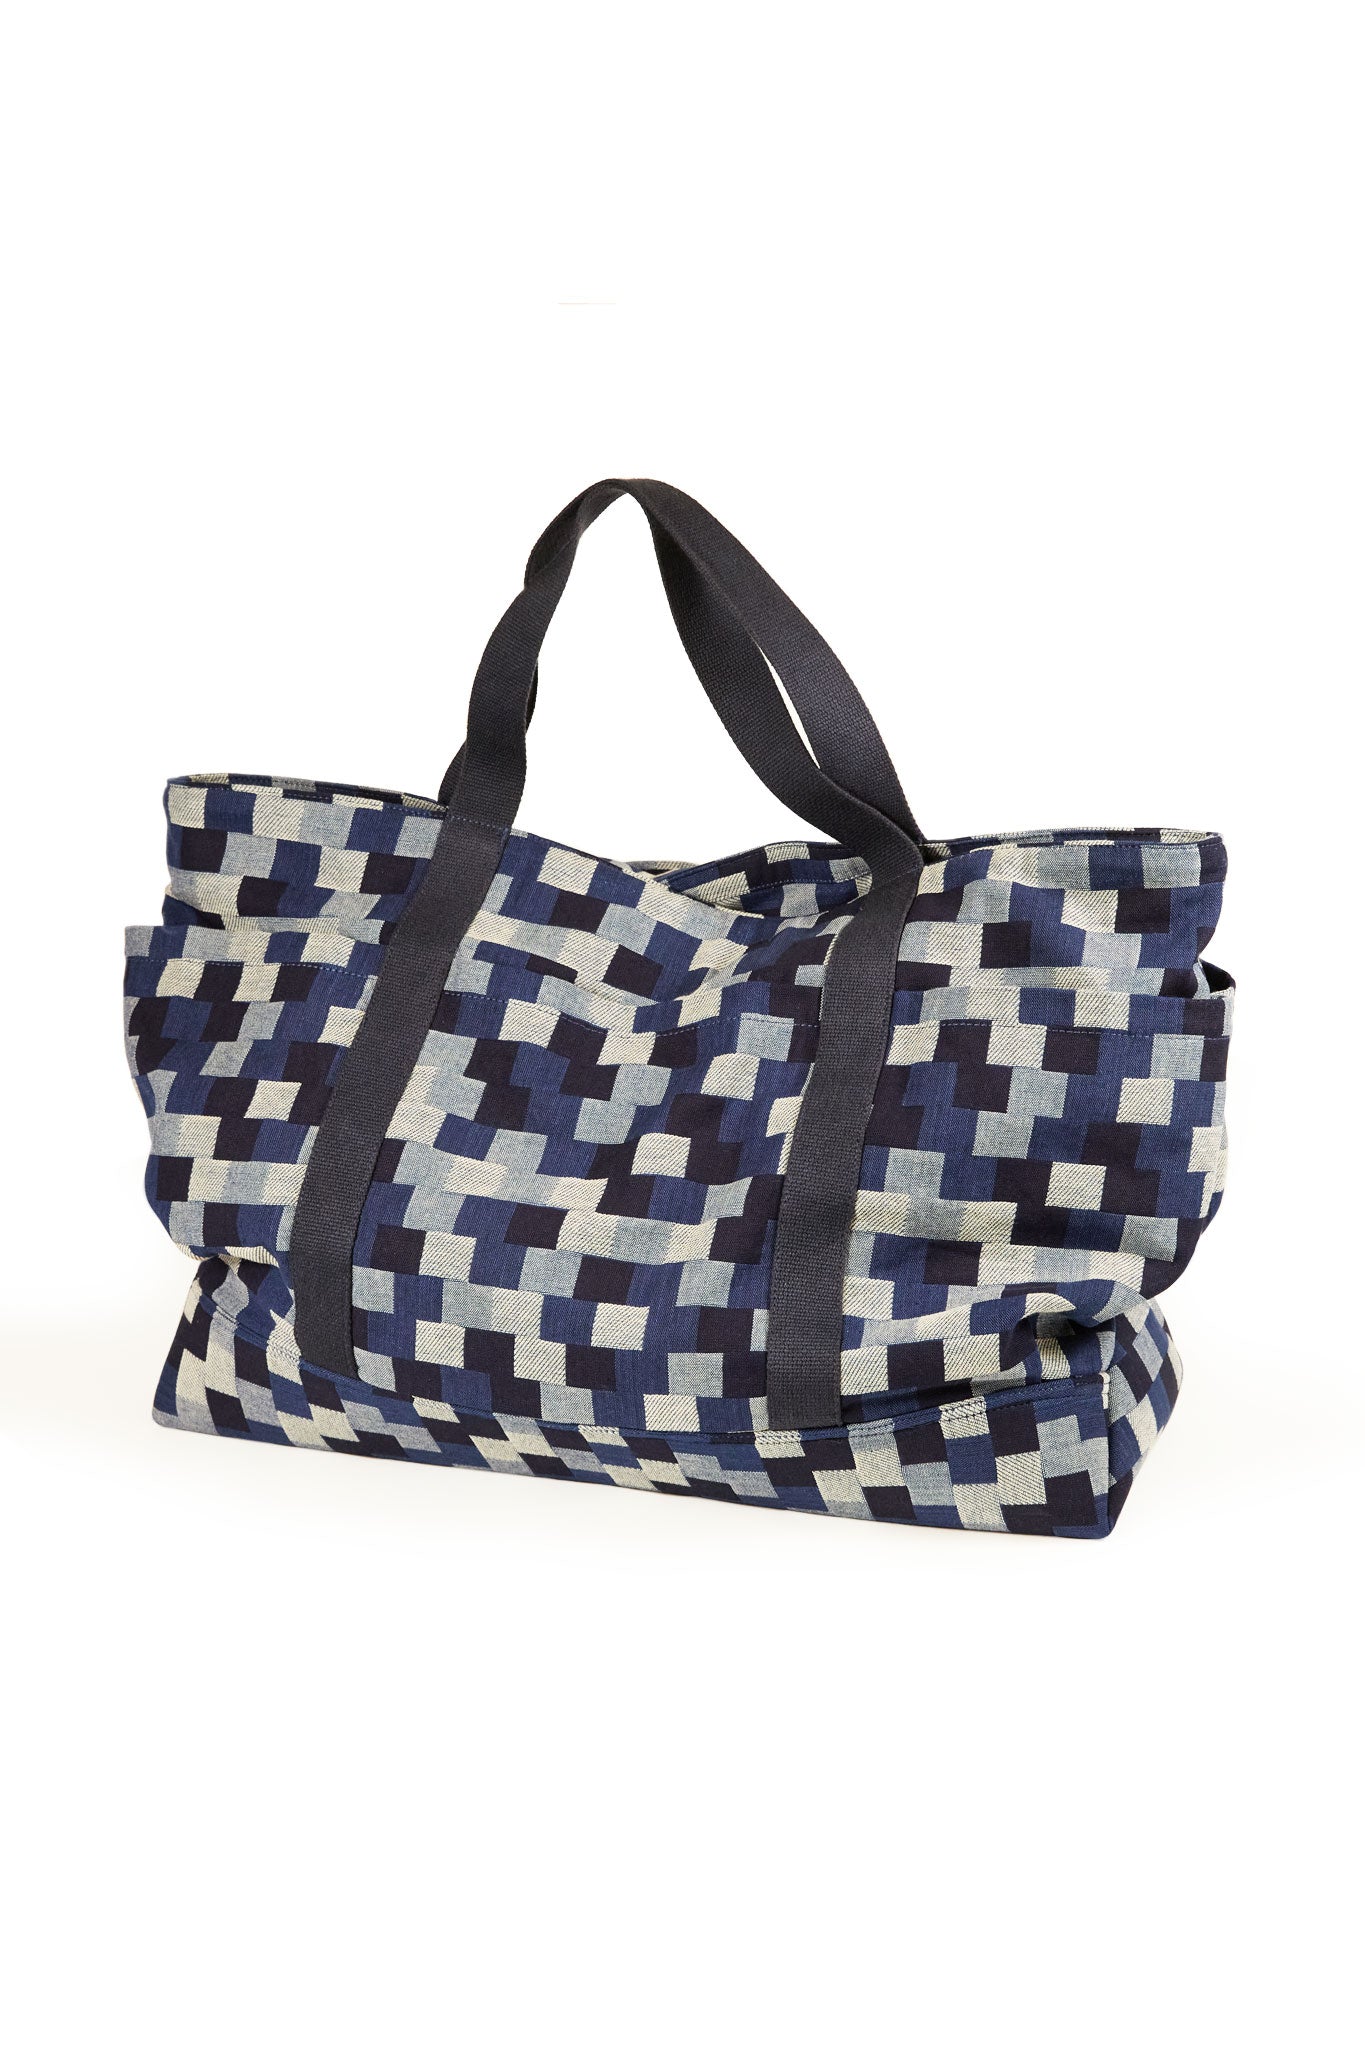 Oversized Weekend Tote - Denim Check